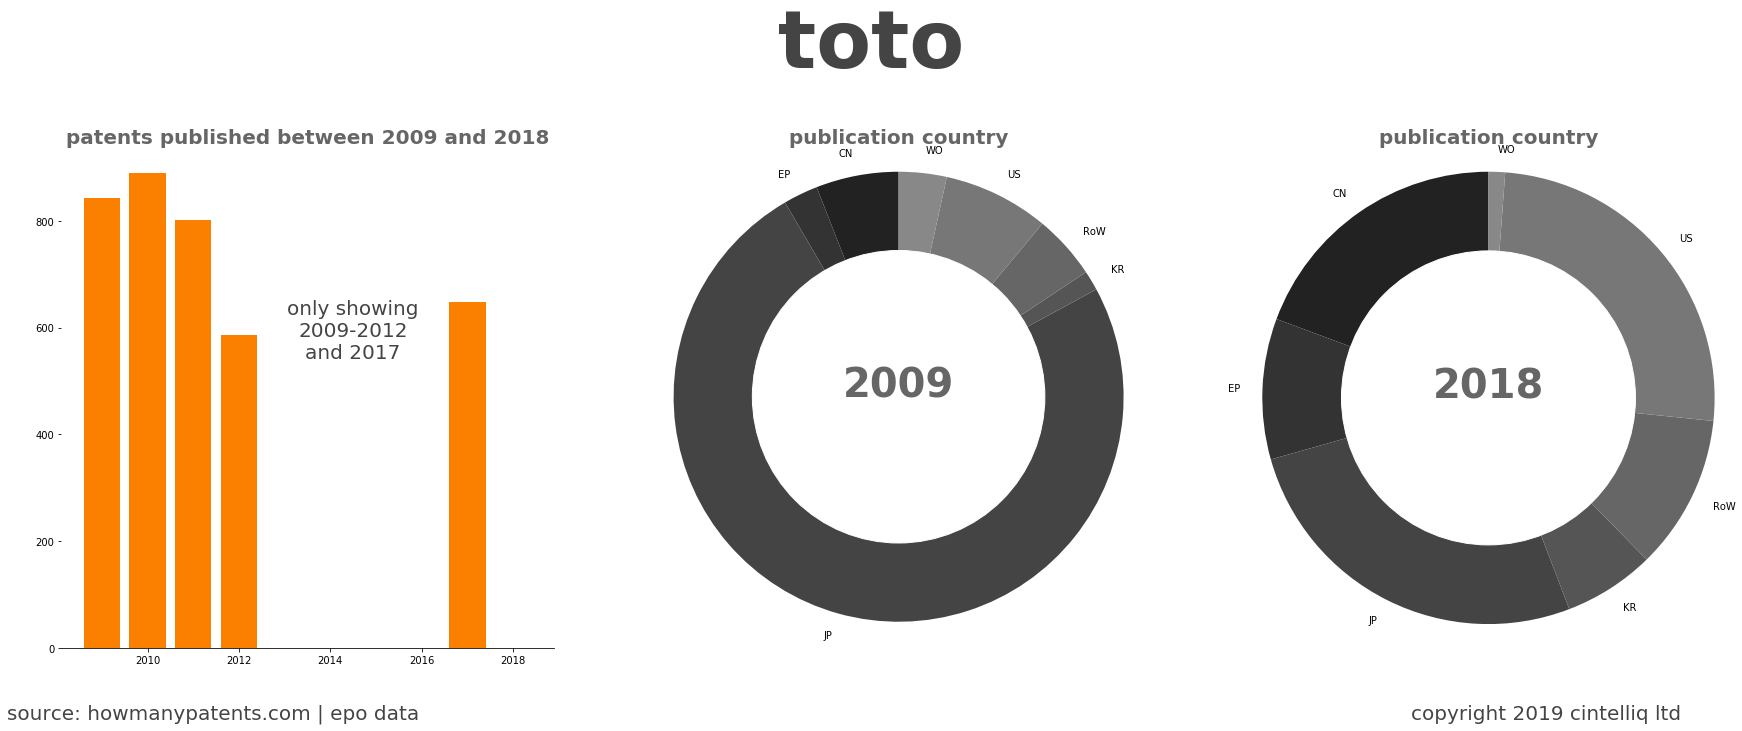 summary of patents for Toto